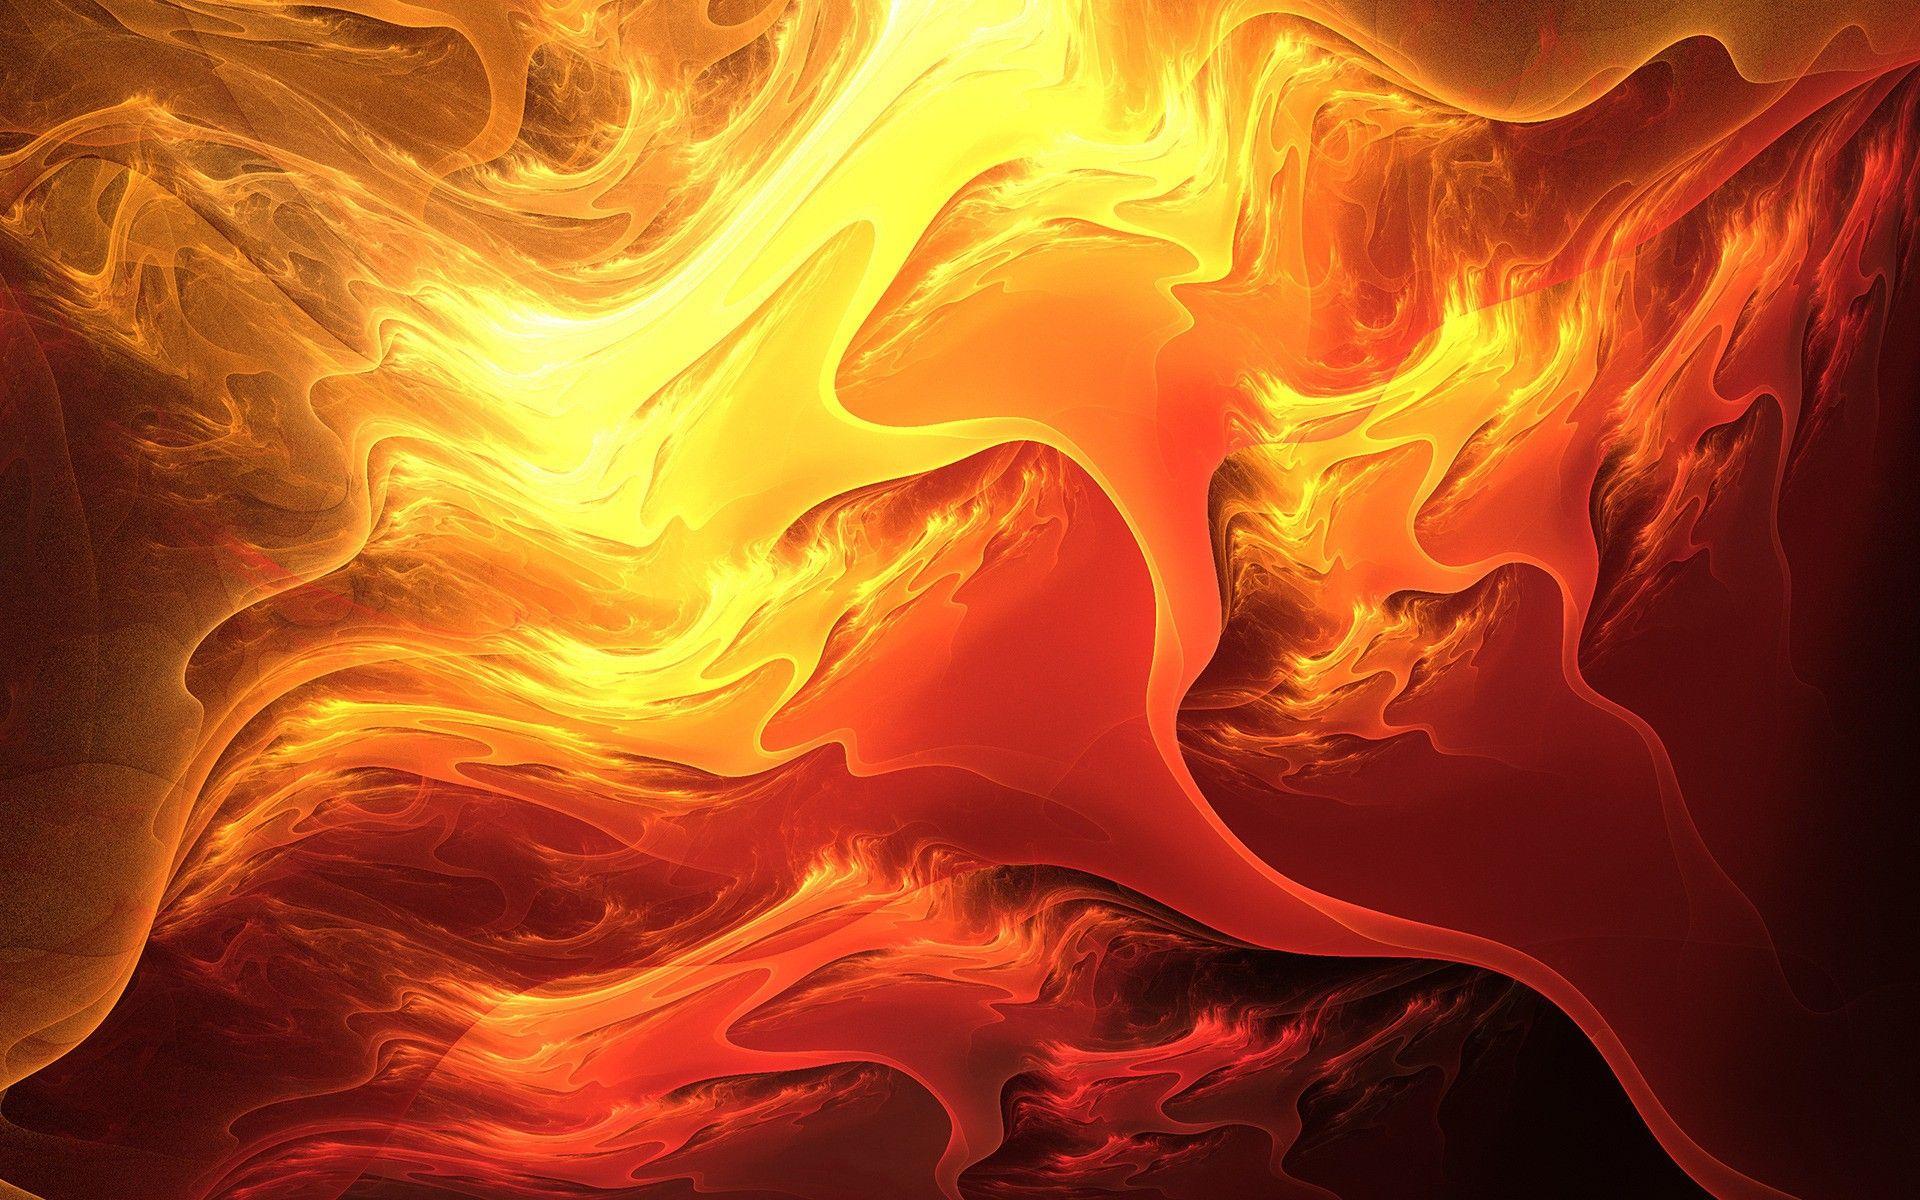 3D Abstract. Abstract, background, wallpaper, desktop, color, fire, image. Abstract, Bright paintings, Fire art